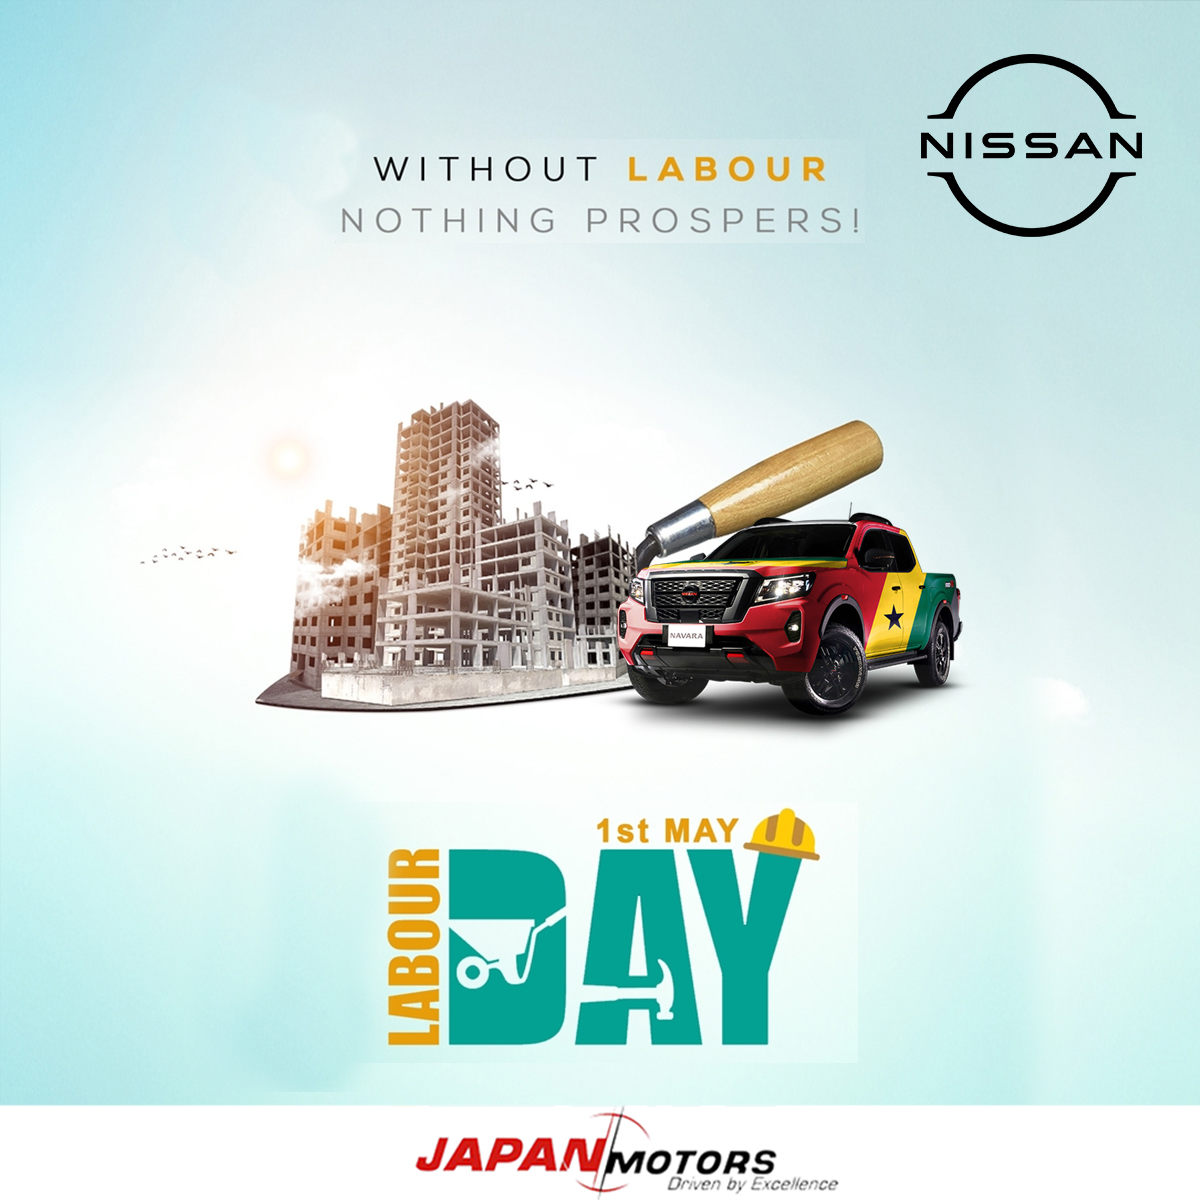 Happy Labour Day to all Ghanaian workers! Your hard work and dedication keep our nation thriving. Without Labour, nothing prospers.🎉 #Newmonth #JapanMotors #NissanGhana #SolidarityForever #Nissan #LabourDay #NewMonthJourney